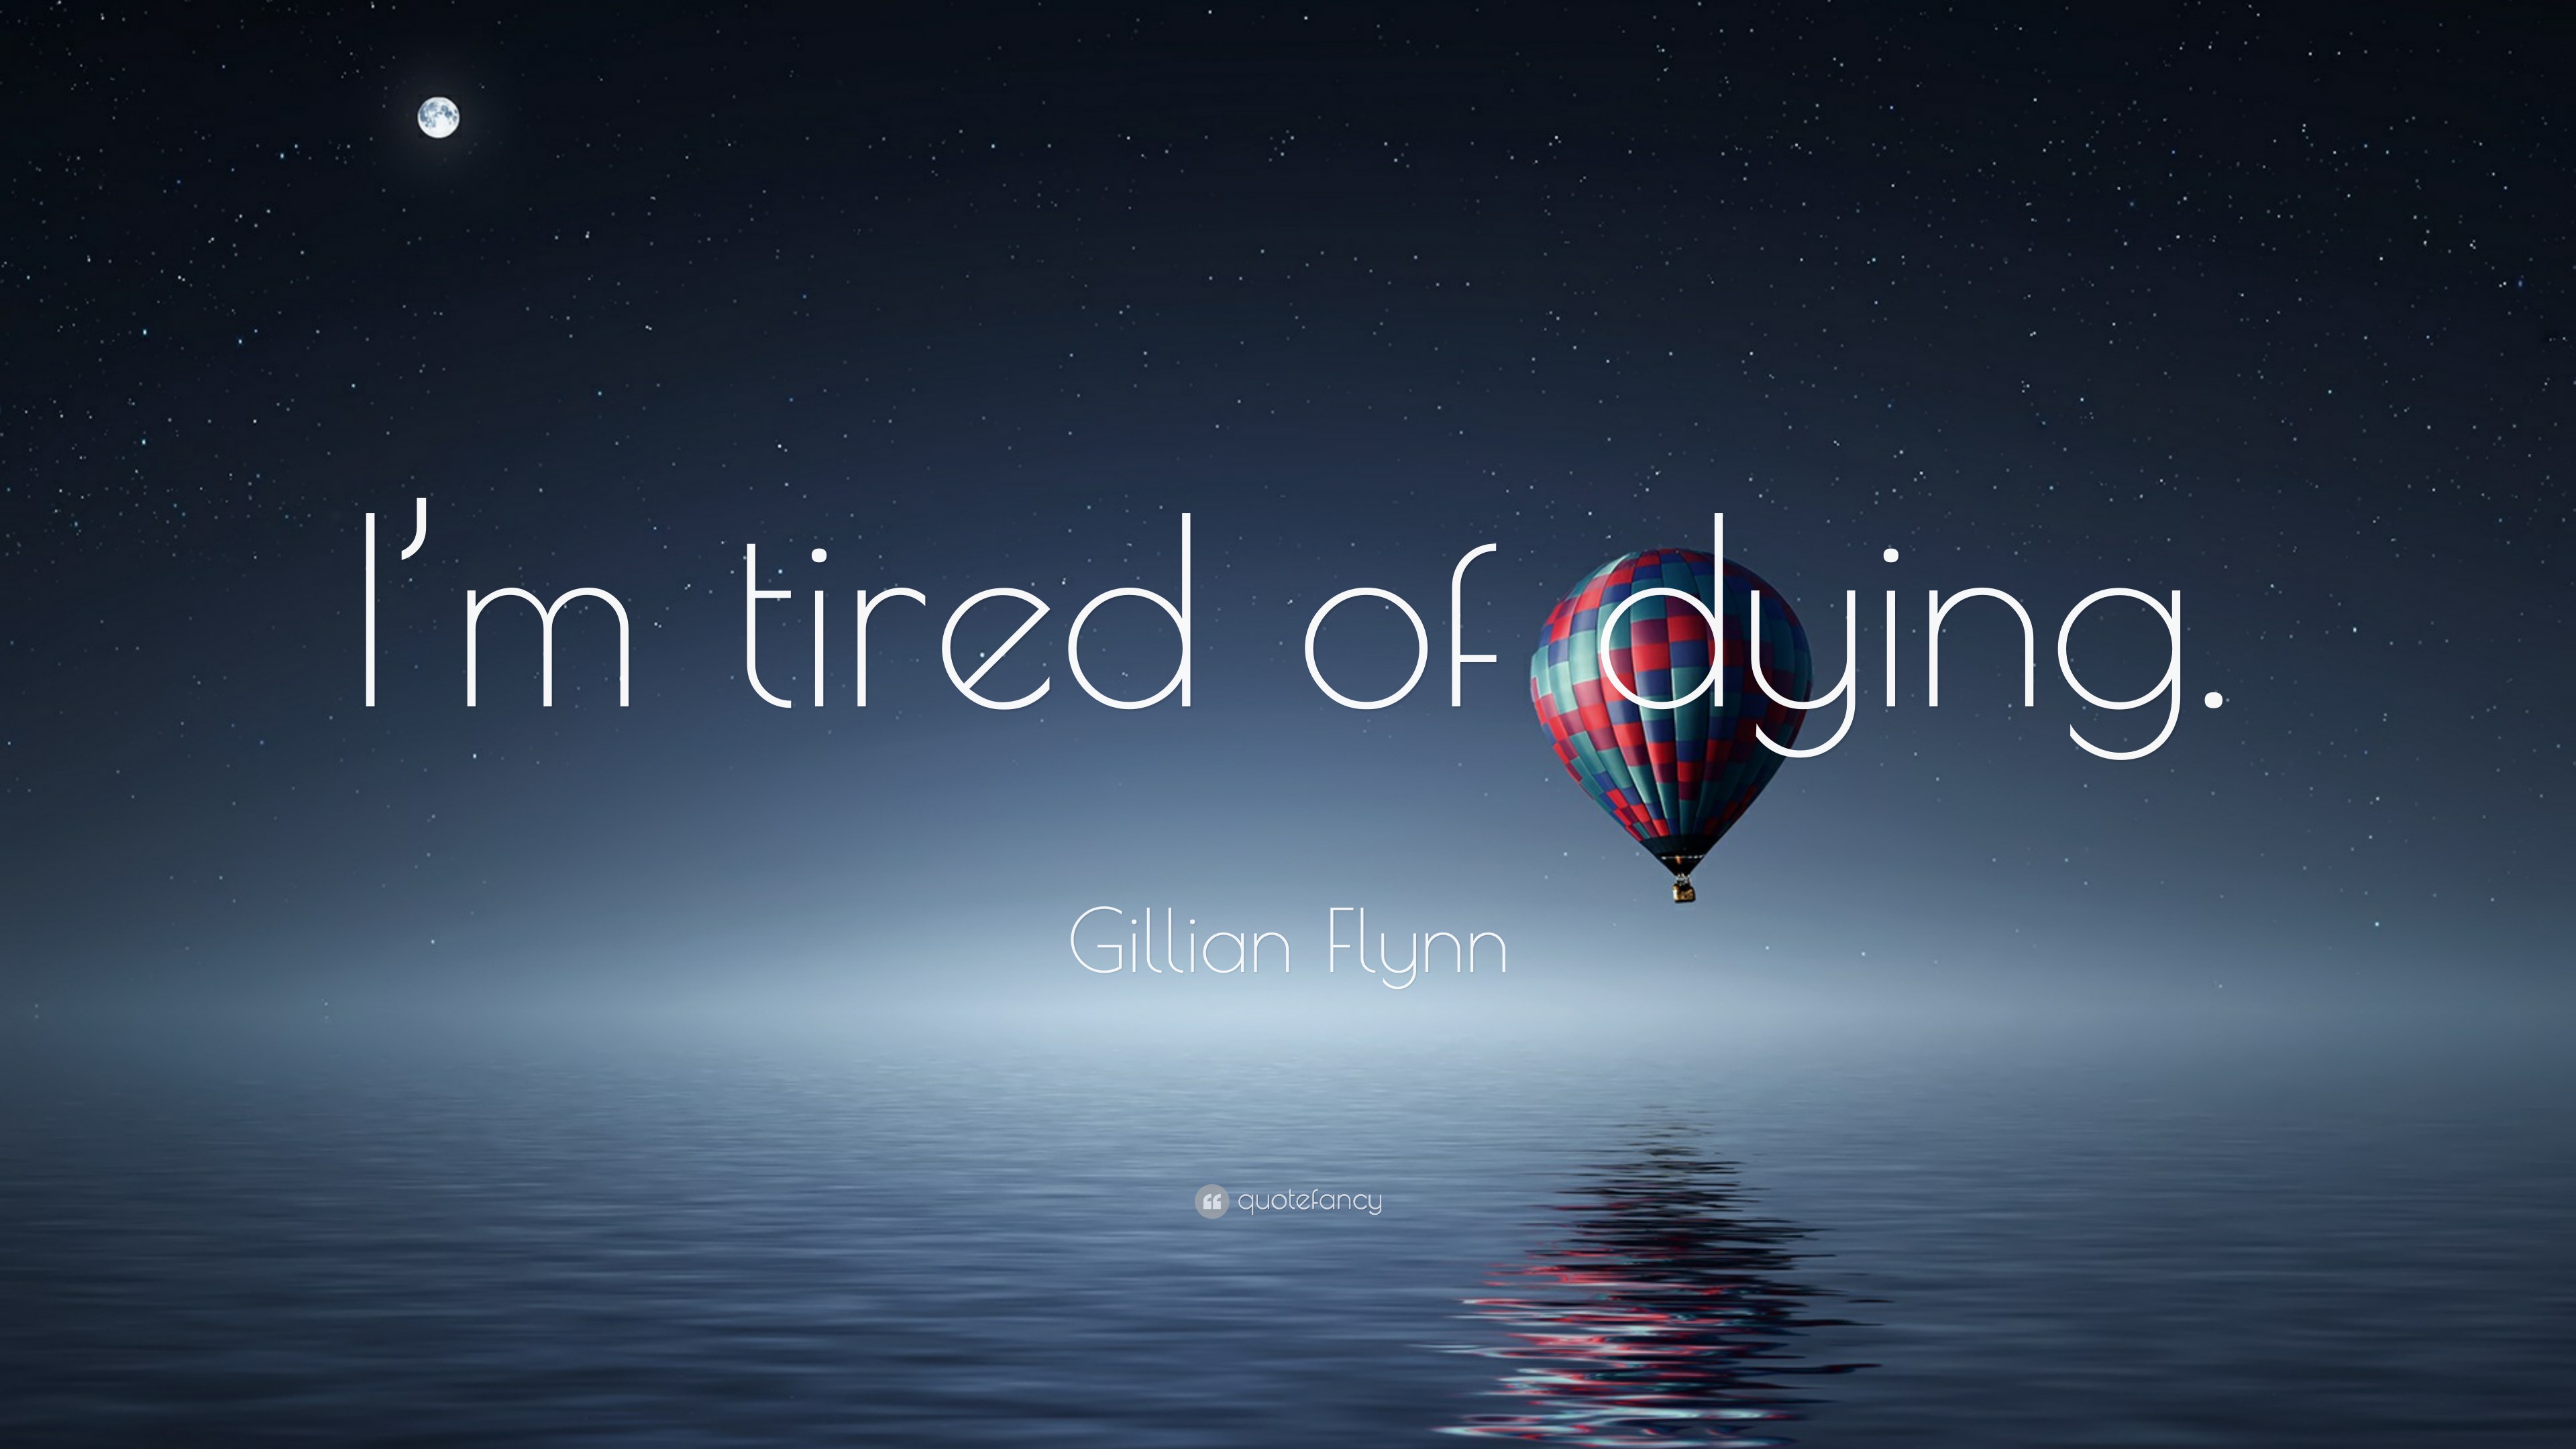 Gillian Flynn Quote: “I'm tired of dying.”